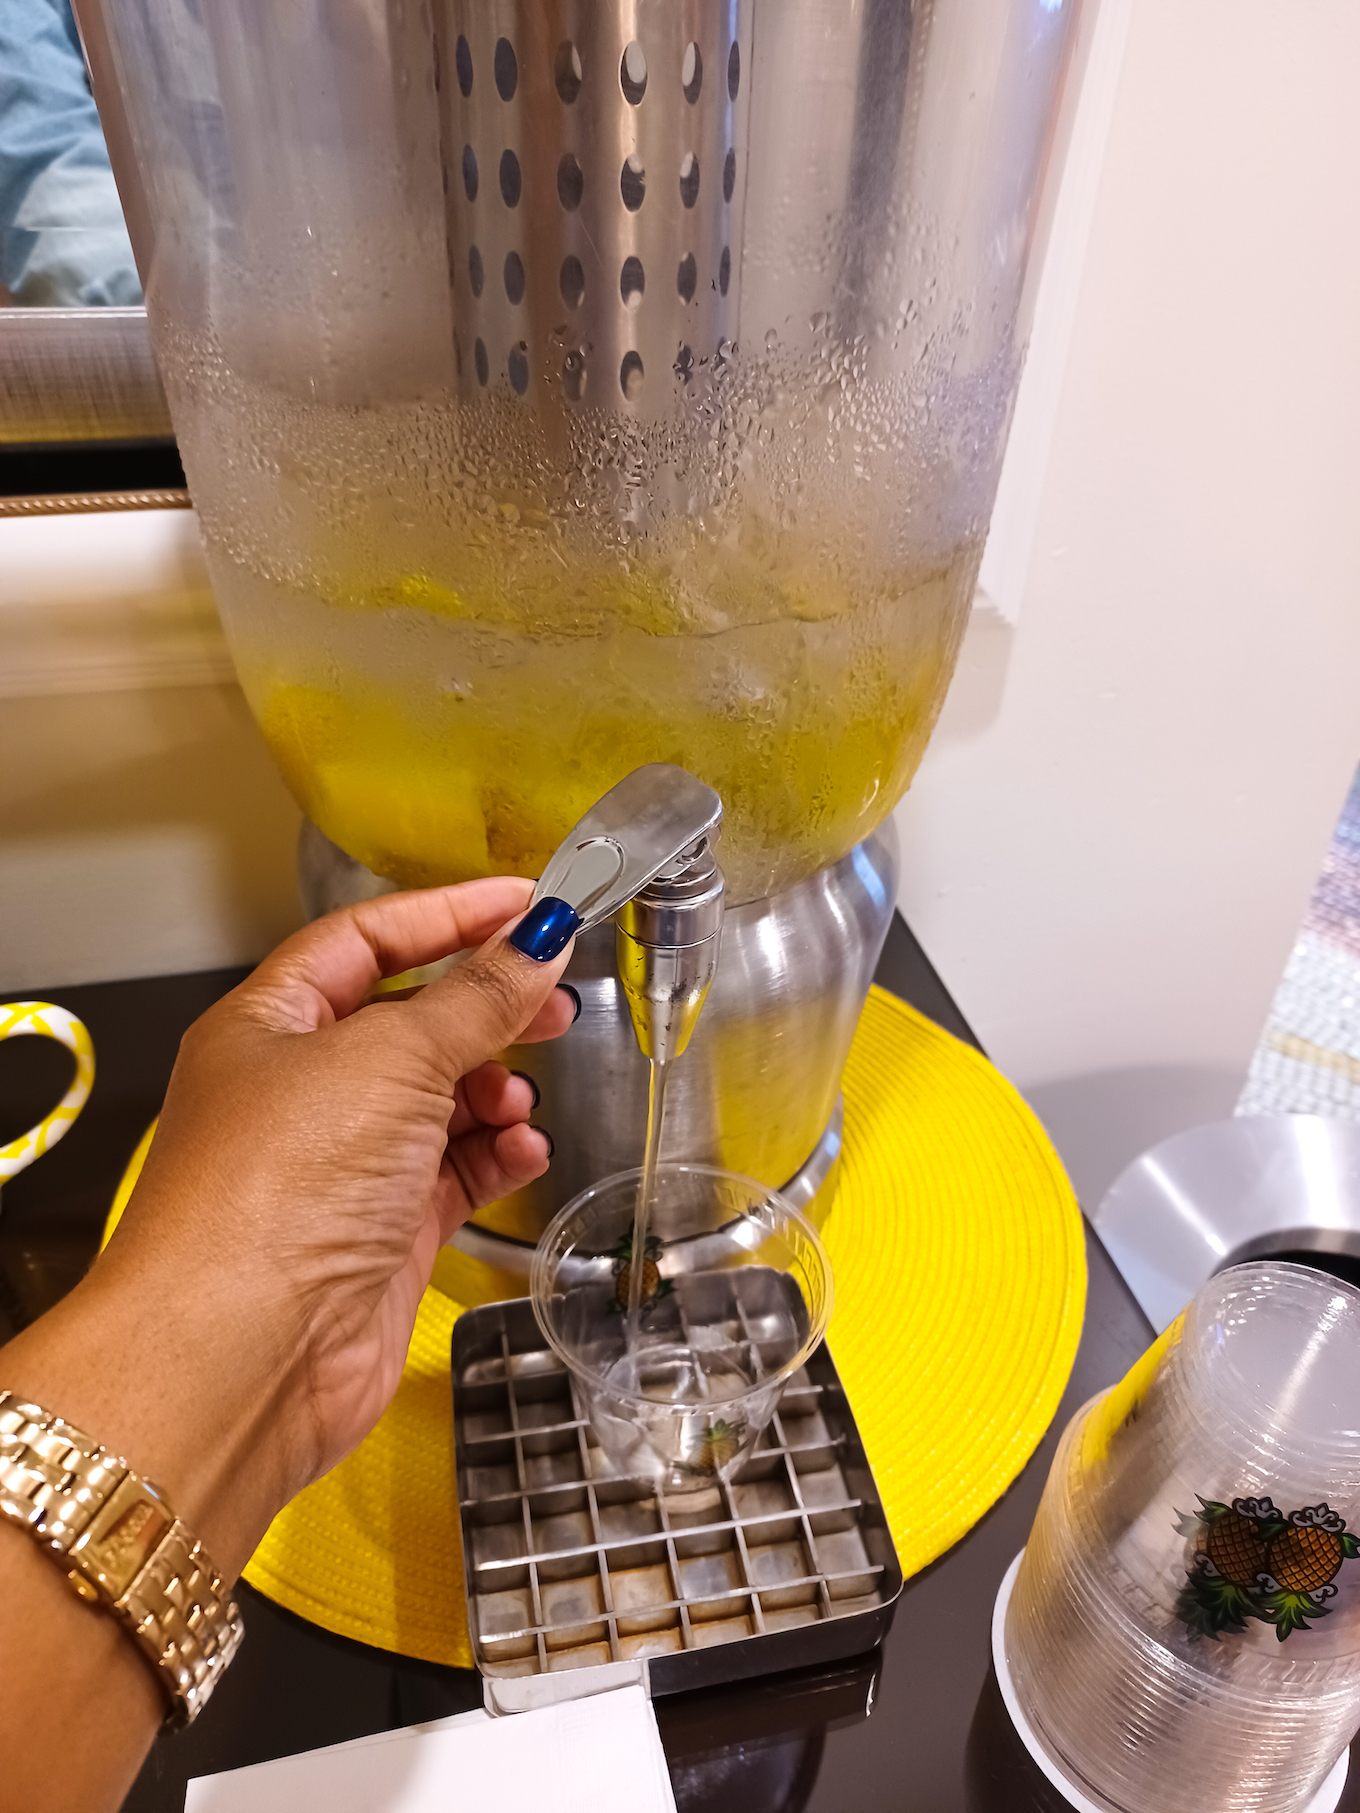 This Bahamian Gyal blogger Rogan Smith pours pineapple infused water at StayPineapple Hotel in New York City